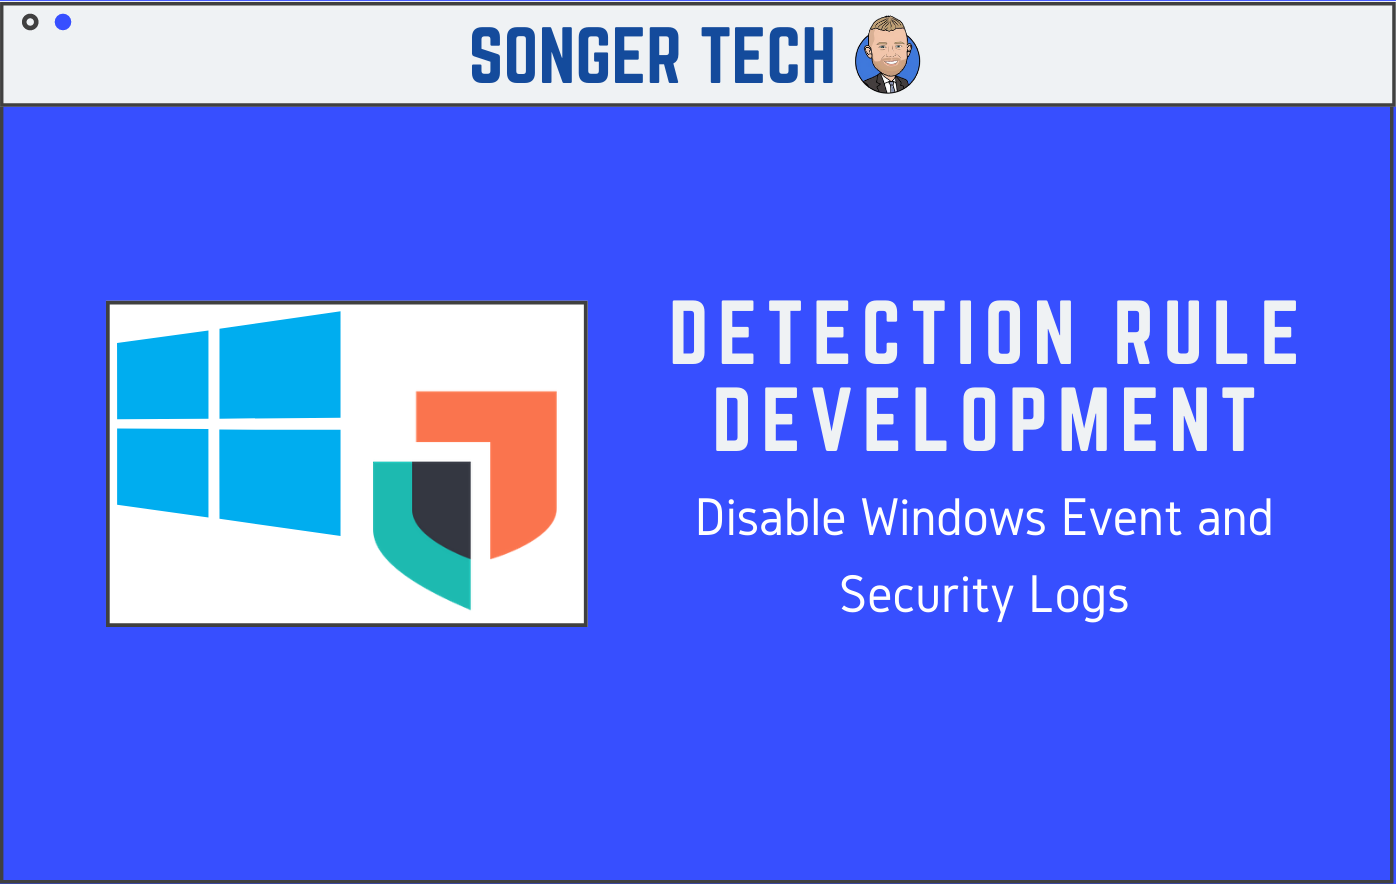 Detection Rule Development: Disable Windows Event and Security Logs